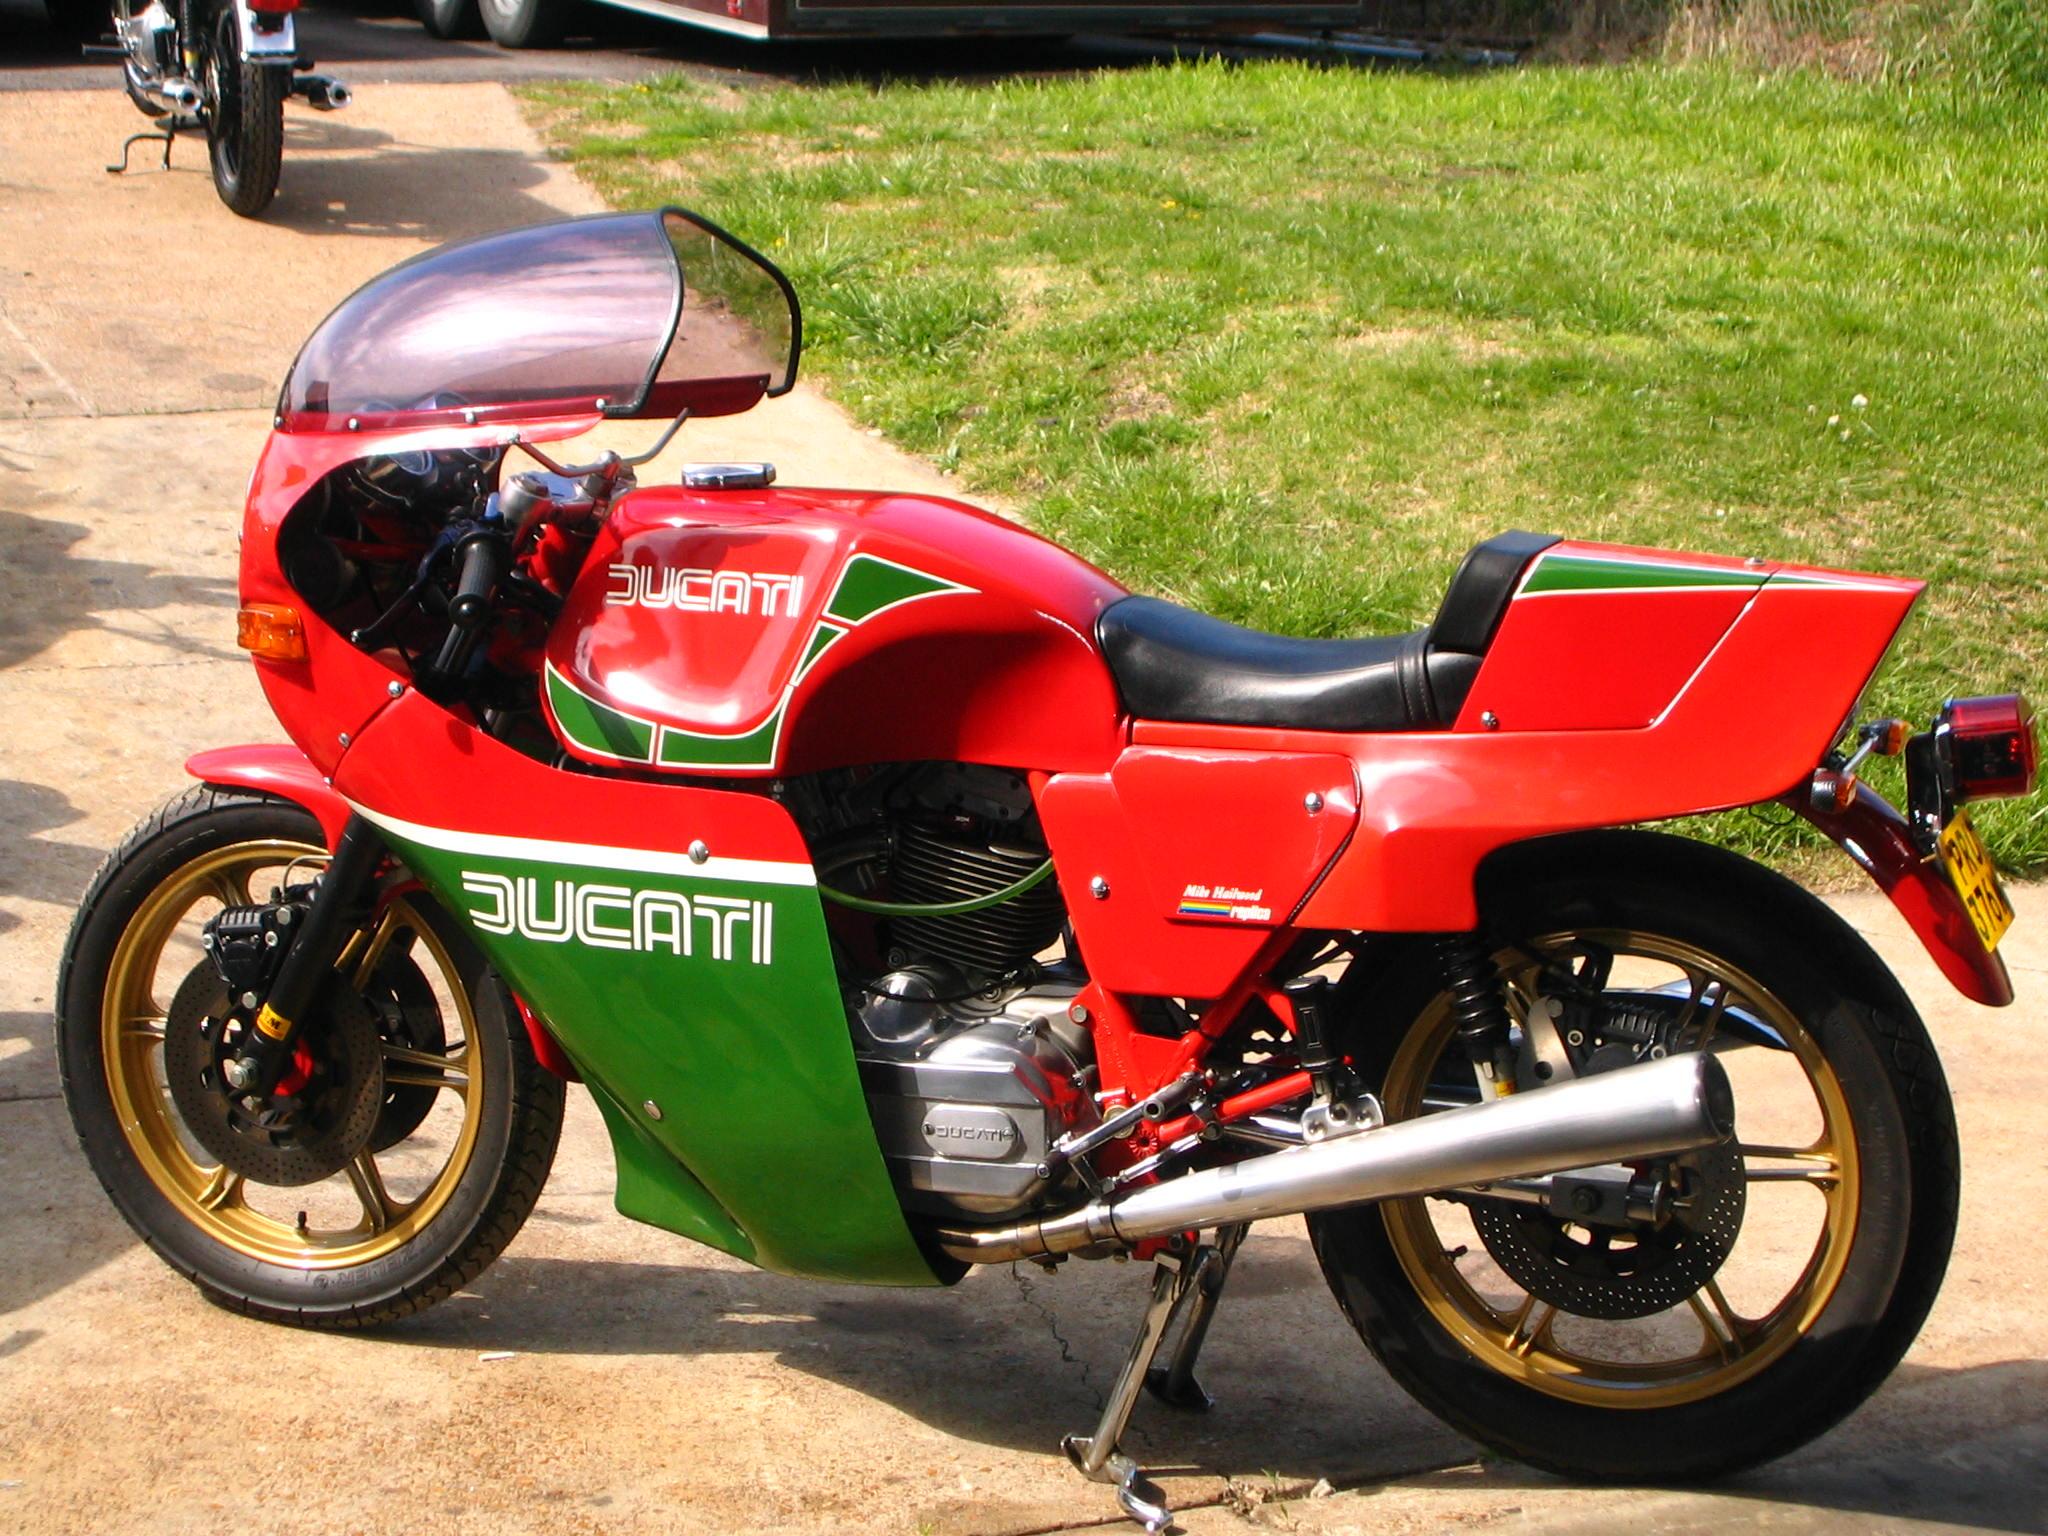 My sport classic tribute 900ss Mike Hailwood.ms